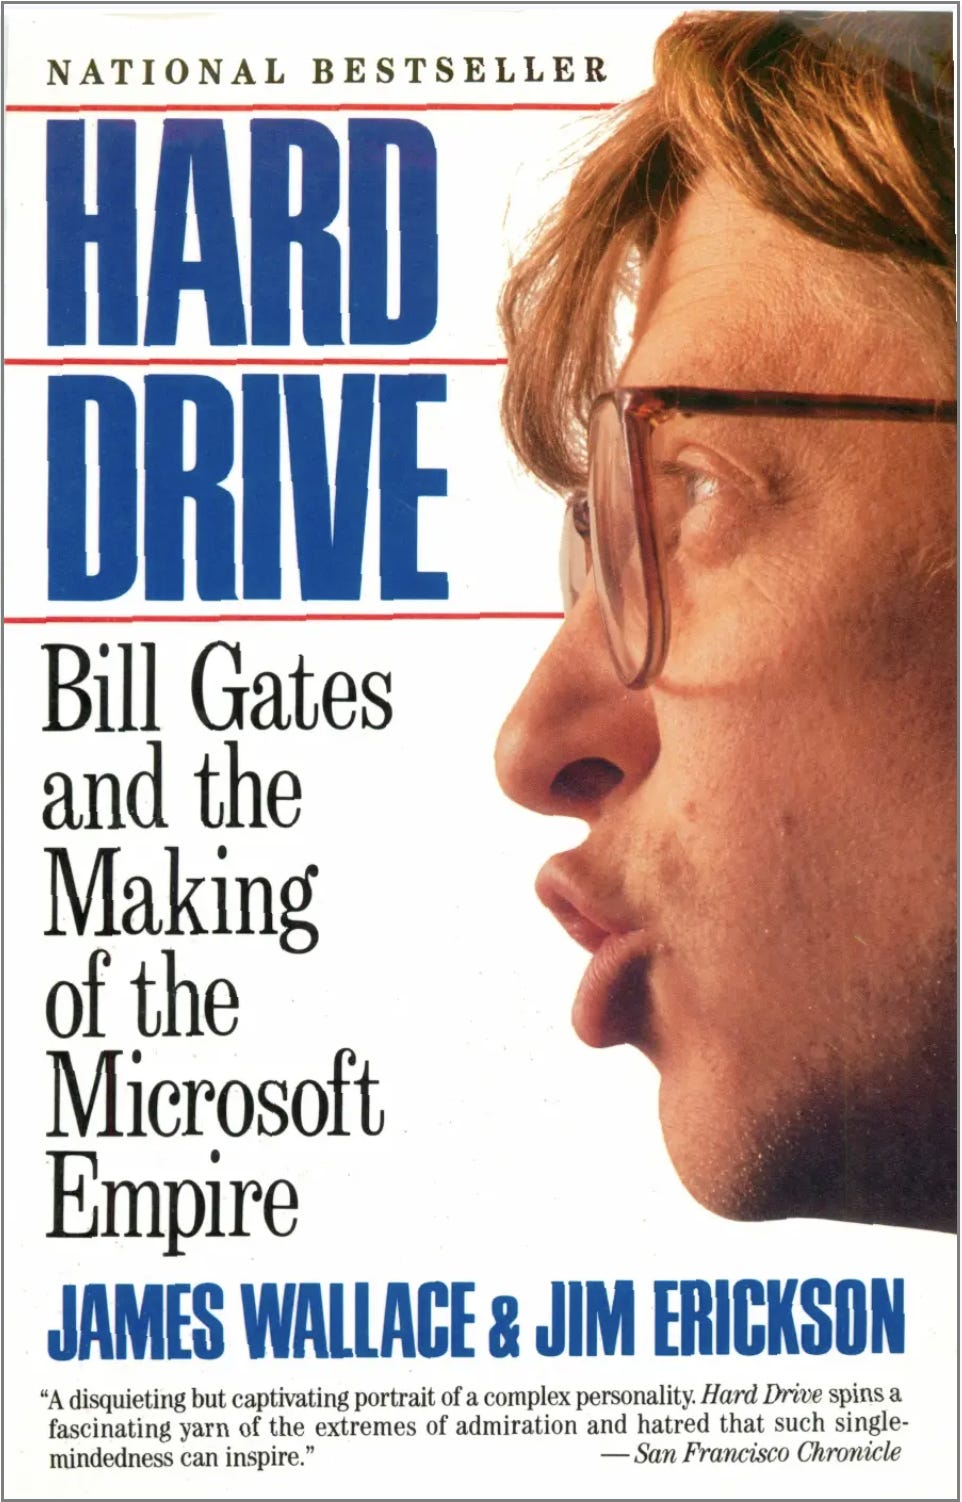 Book cover "Hard Drive: Bill Gates and the Making of the Microsoft Empire" with an angry profile photo of Bill.